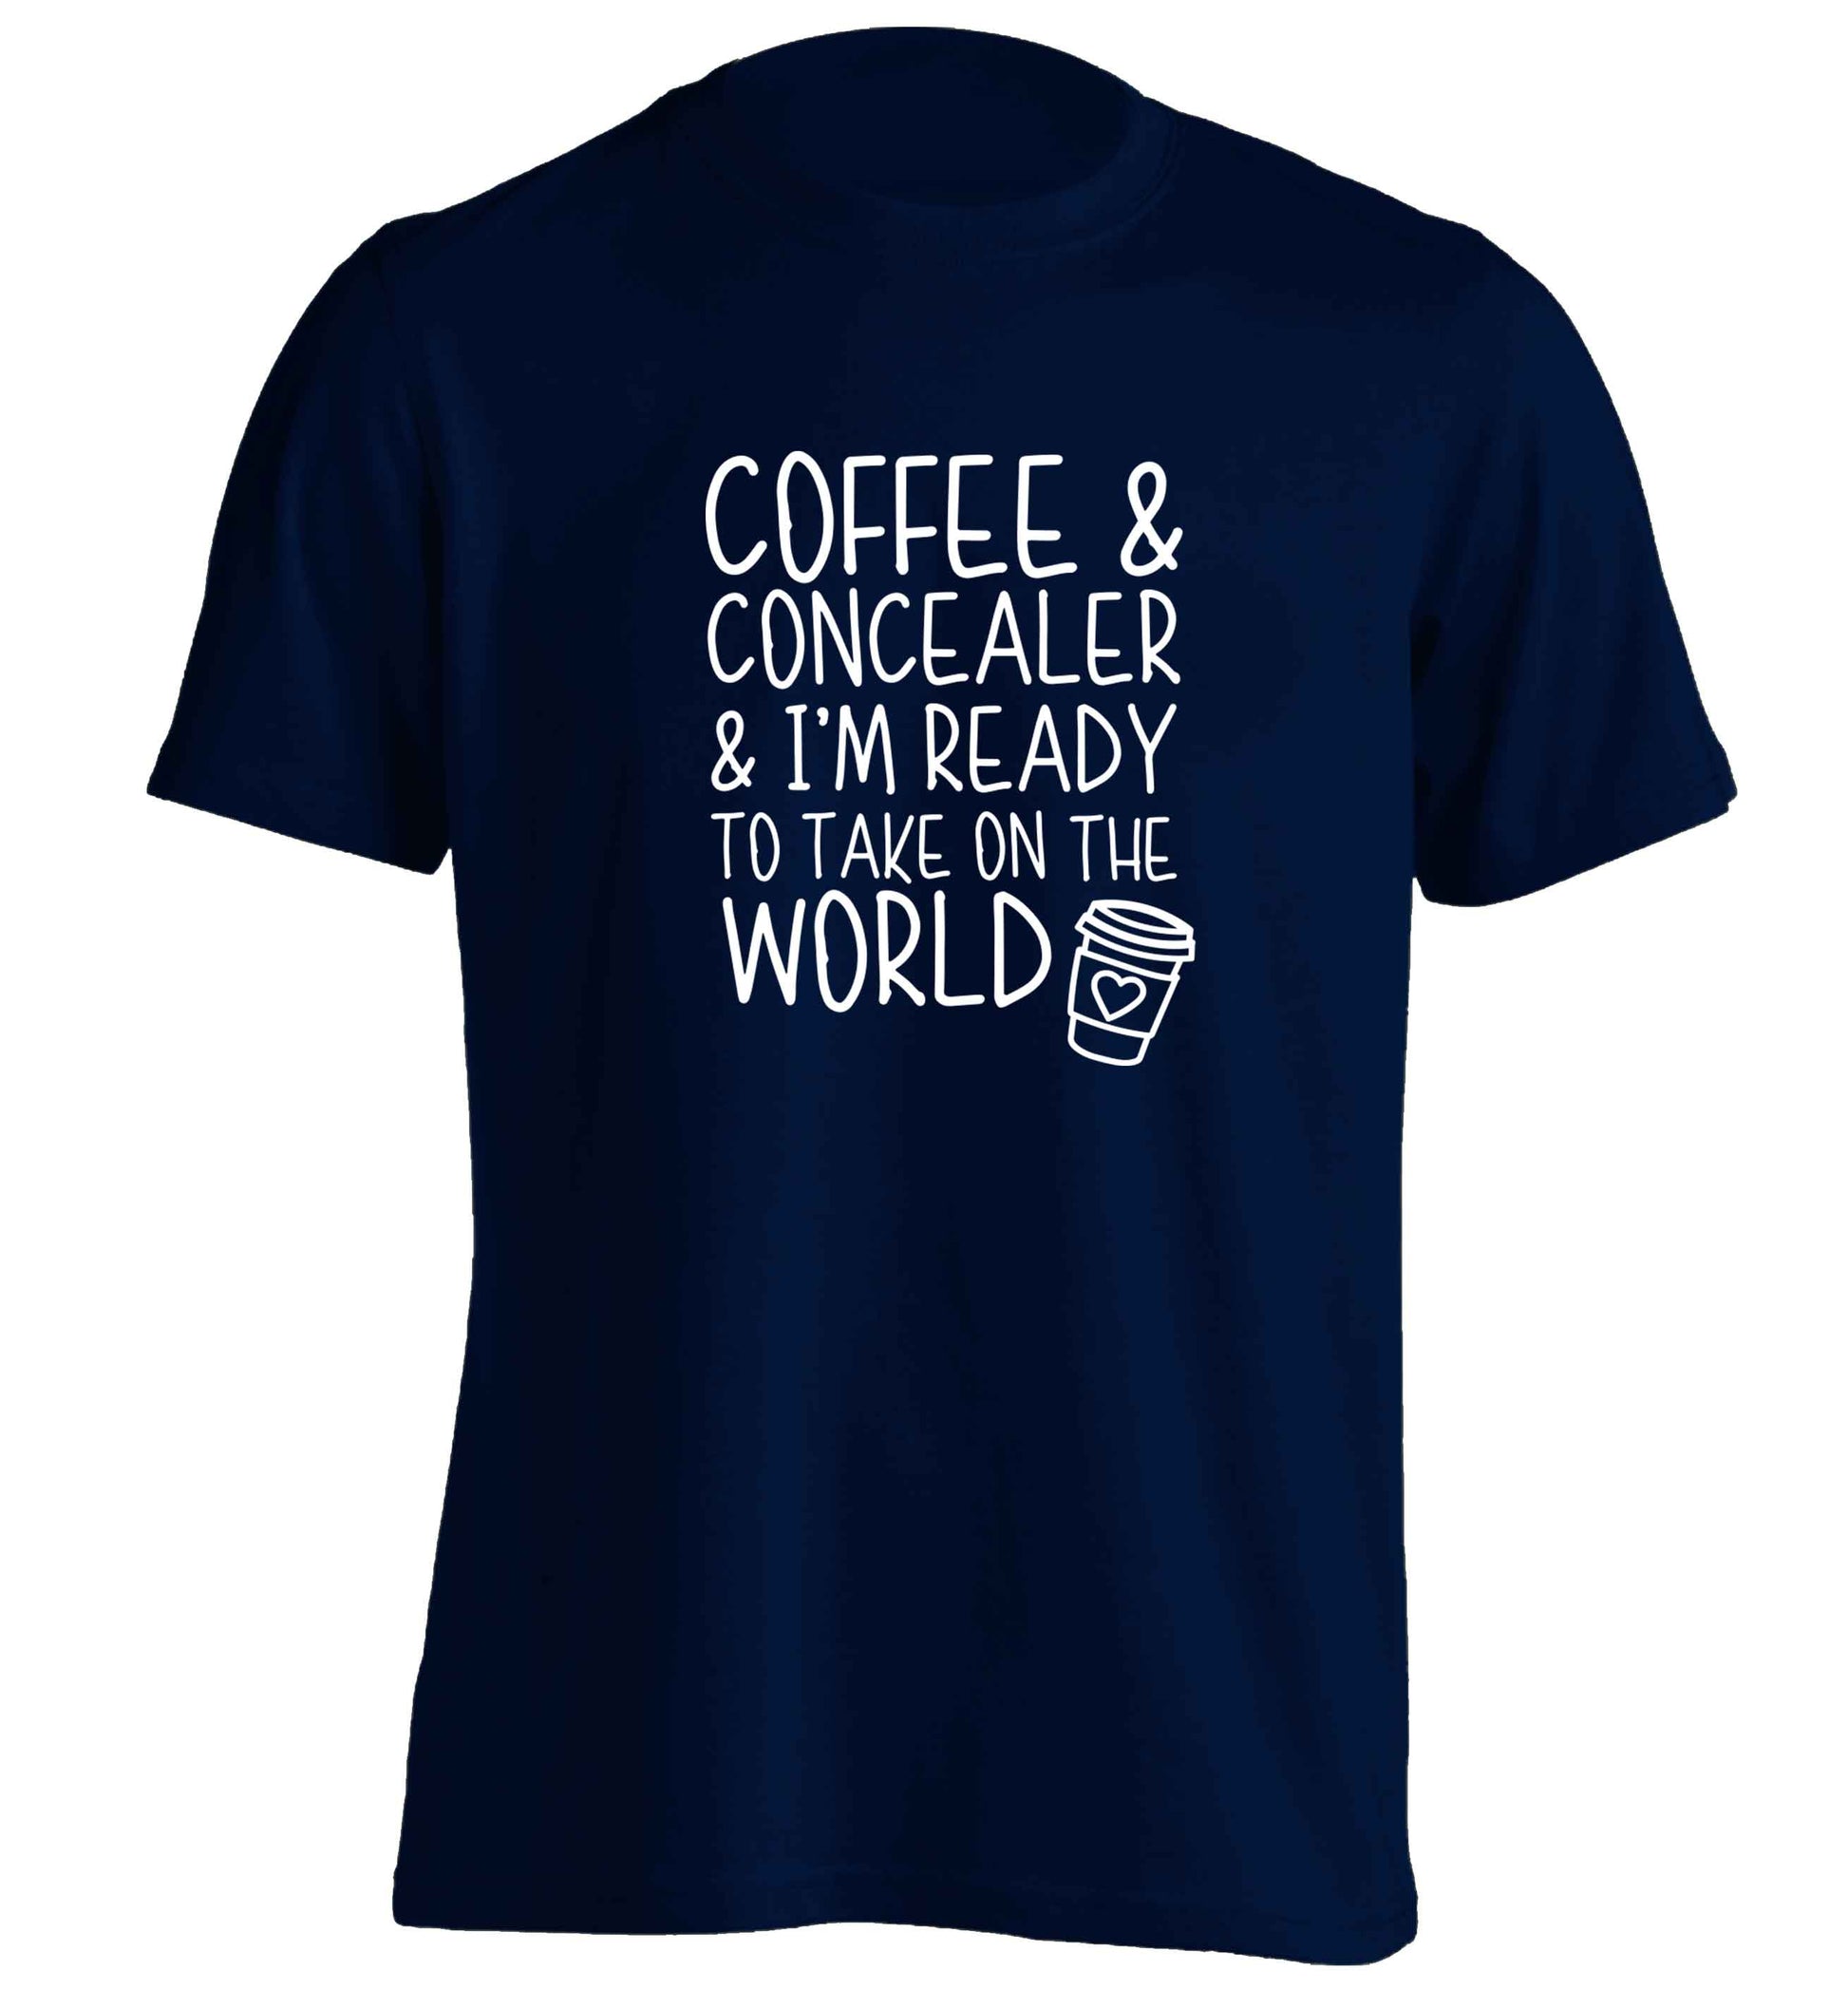 Coffee and concealer and I'm ready to take on the world adults unisex navy Tshirt 2XL